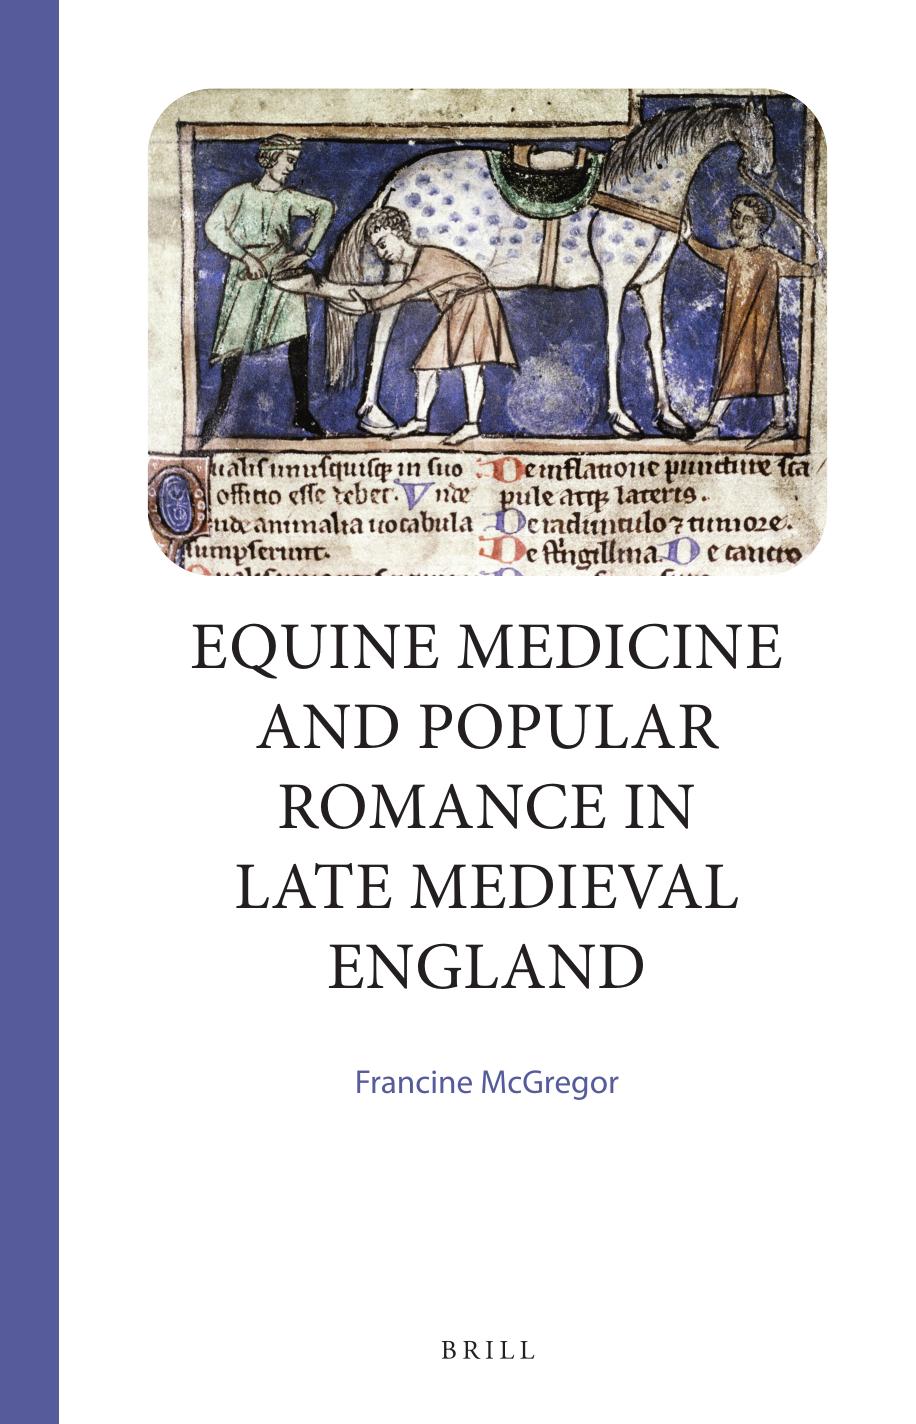 Equine Medicine and Popular Romance in Late Medieval England by Francine McGregor